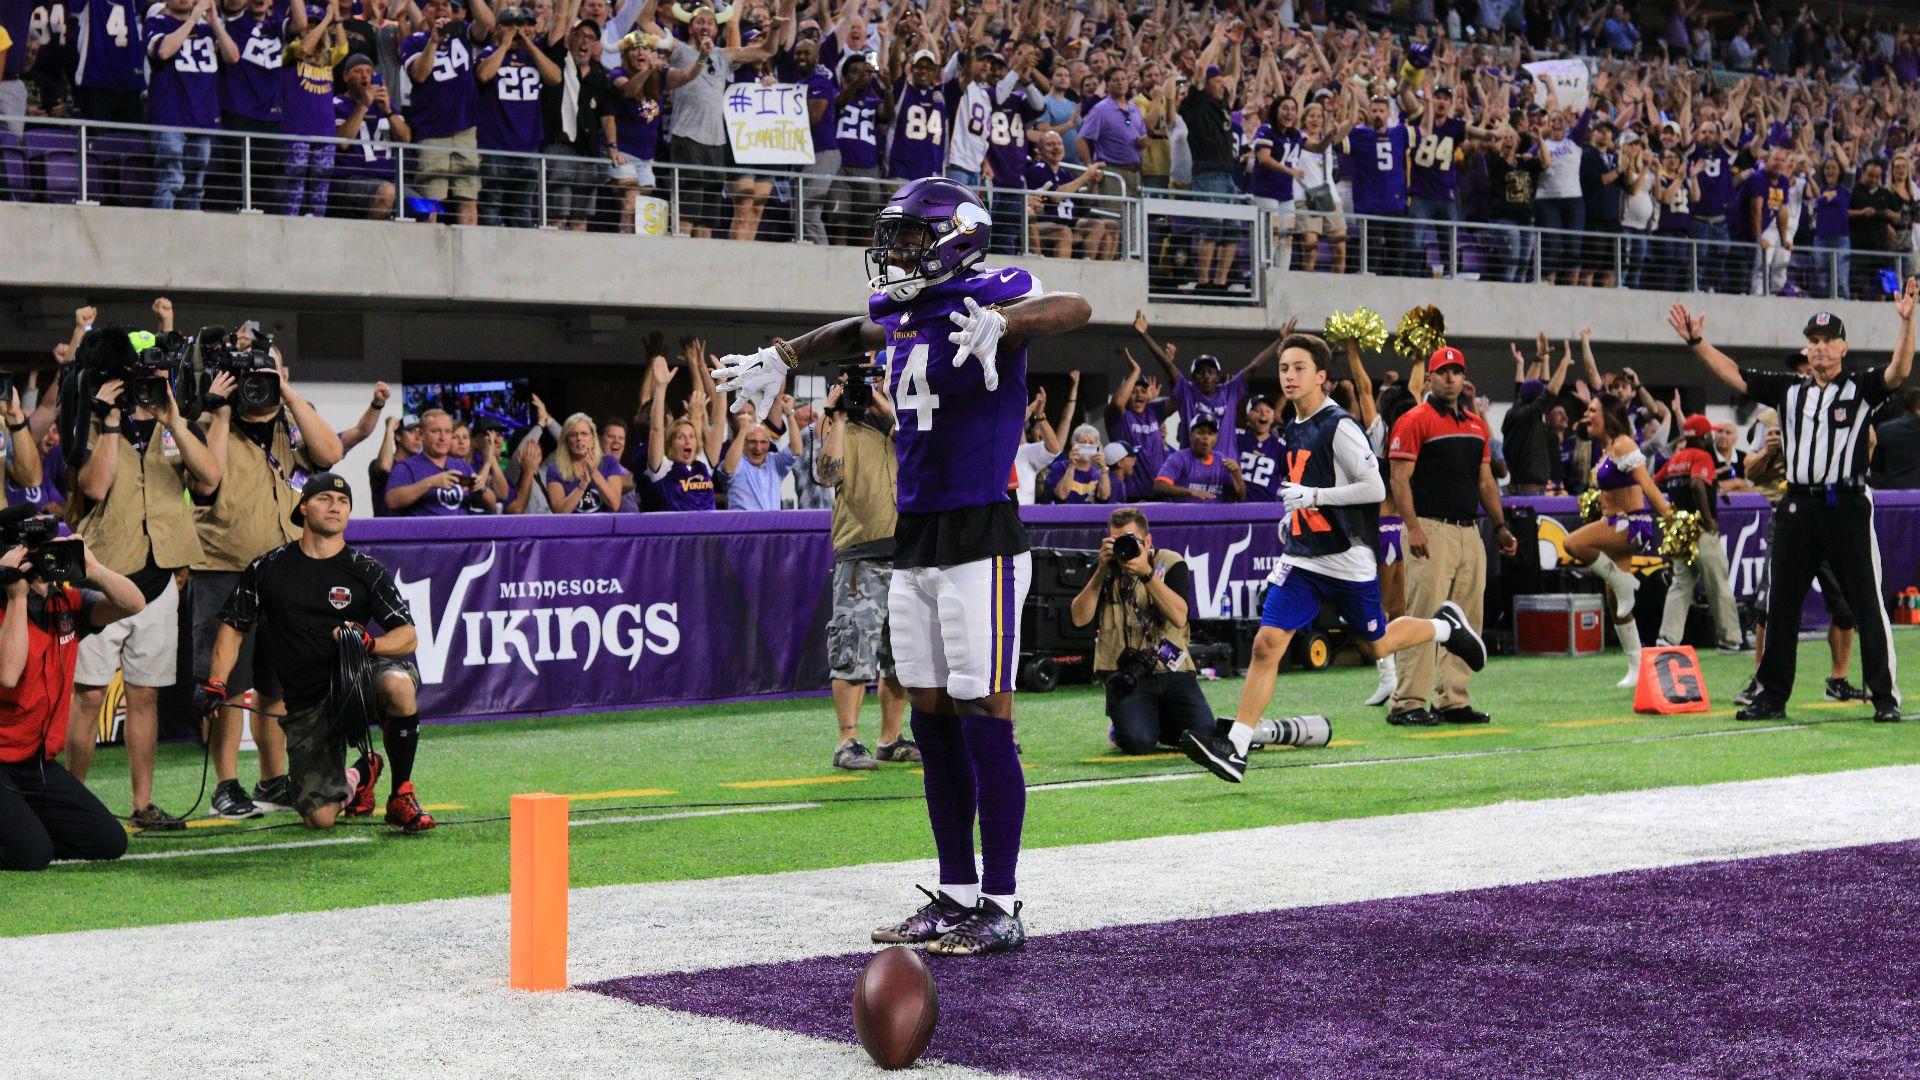 If Vikings win big in remember the spark Stefon Diggs